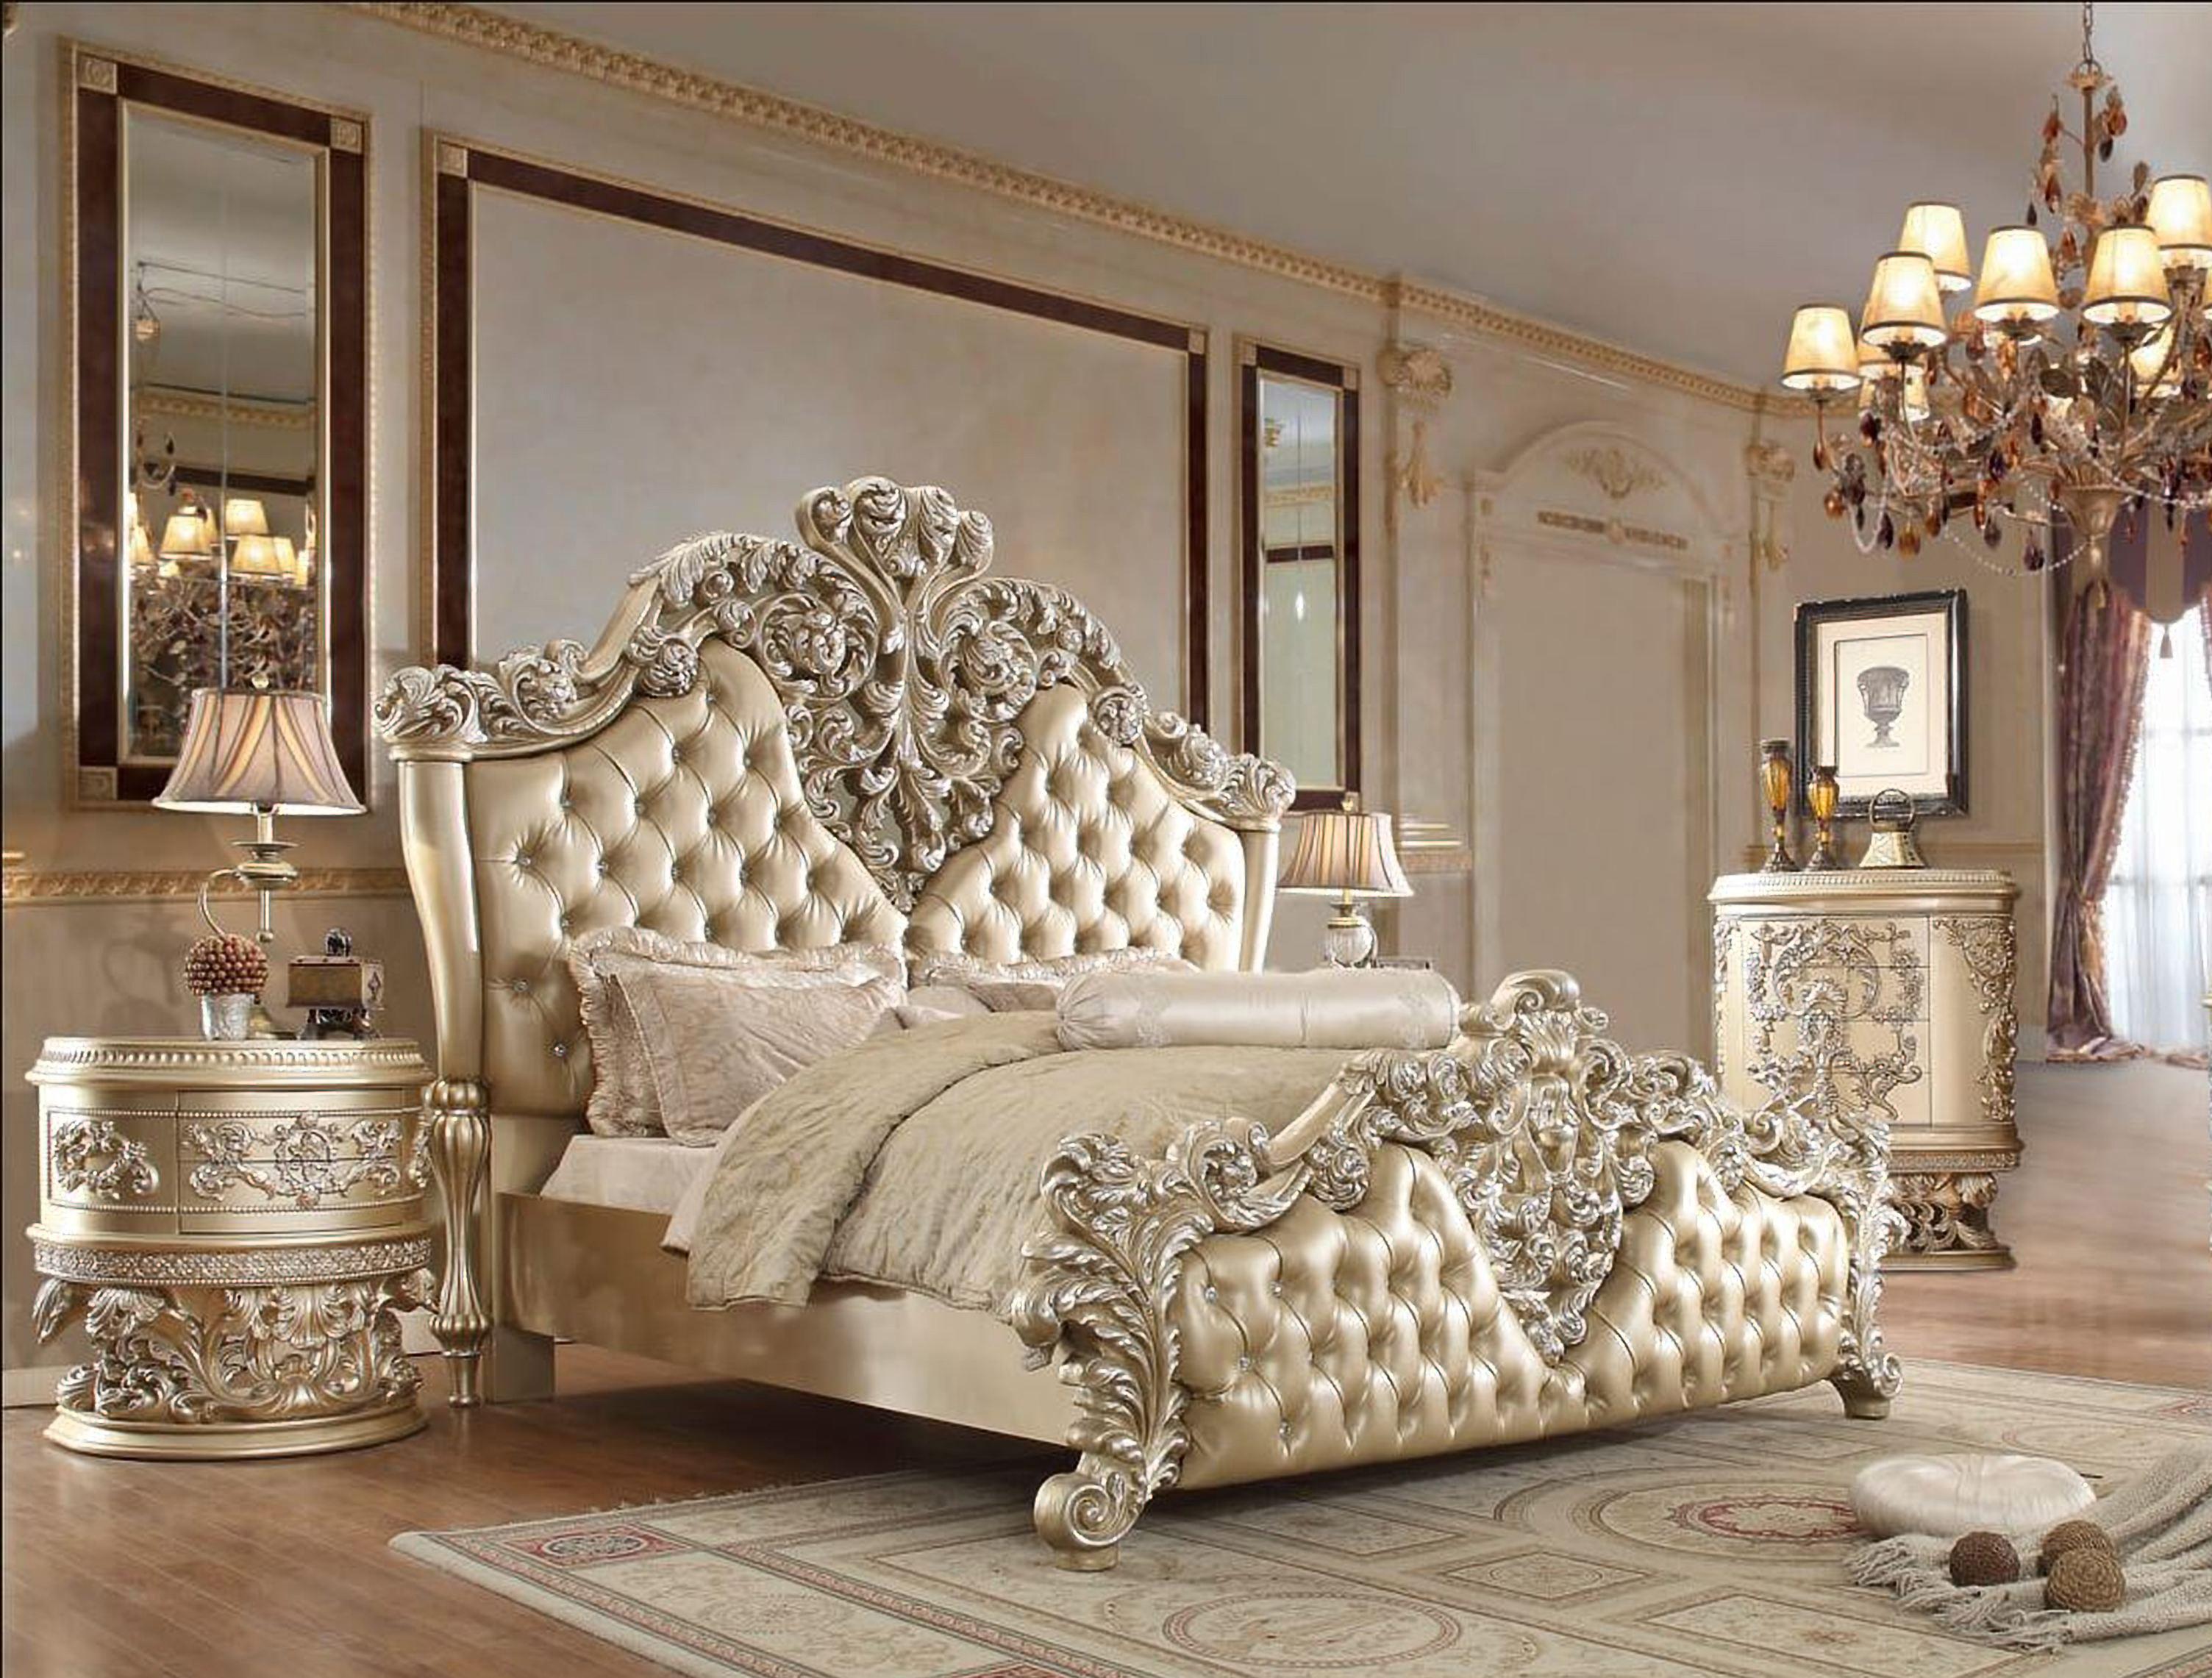 

    
Victorian Champagne CAL KING Bedroom Set 5 Pcs Traditional Homey Design HD-8022
